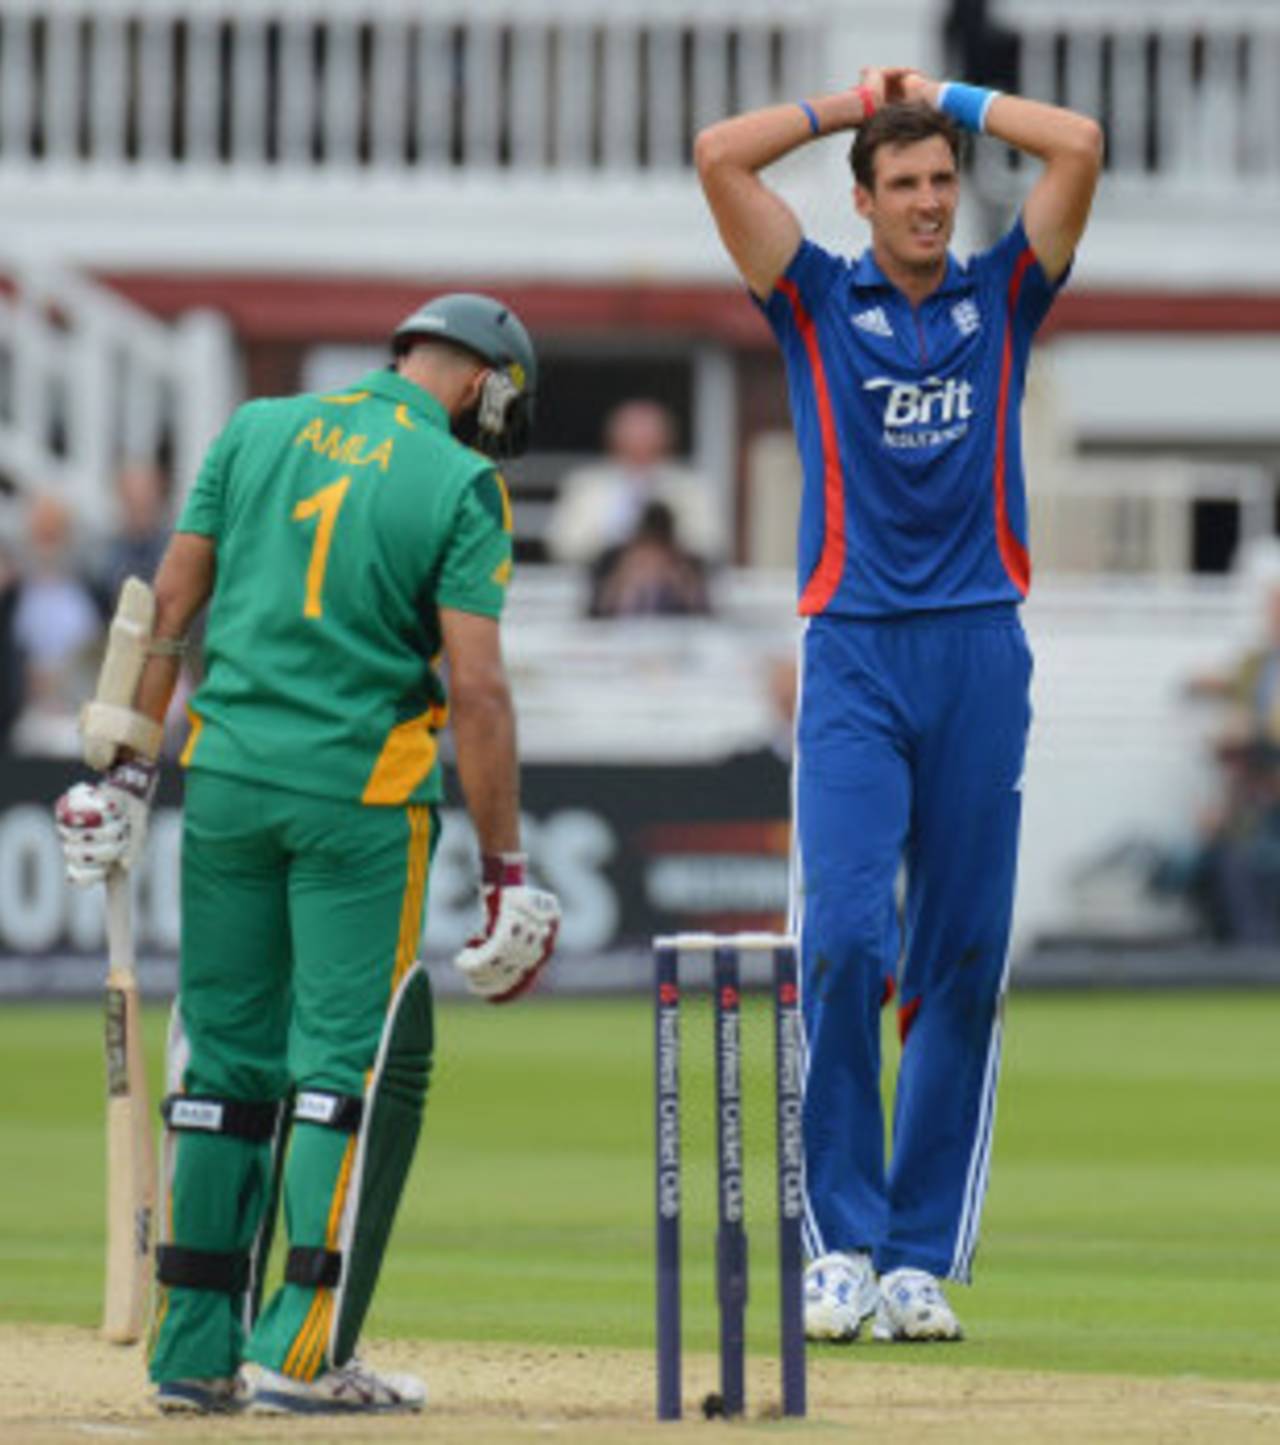 Steven Finn grimaces after Hashim Amla was dropped in the slips, England v South Africa, 4th ODI, Lord's, September 2, 2012